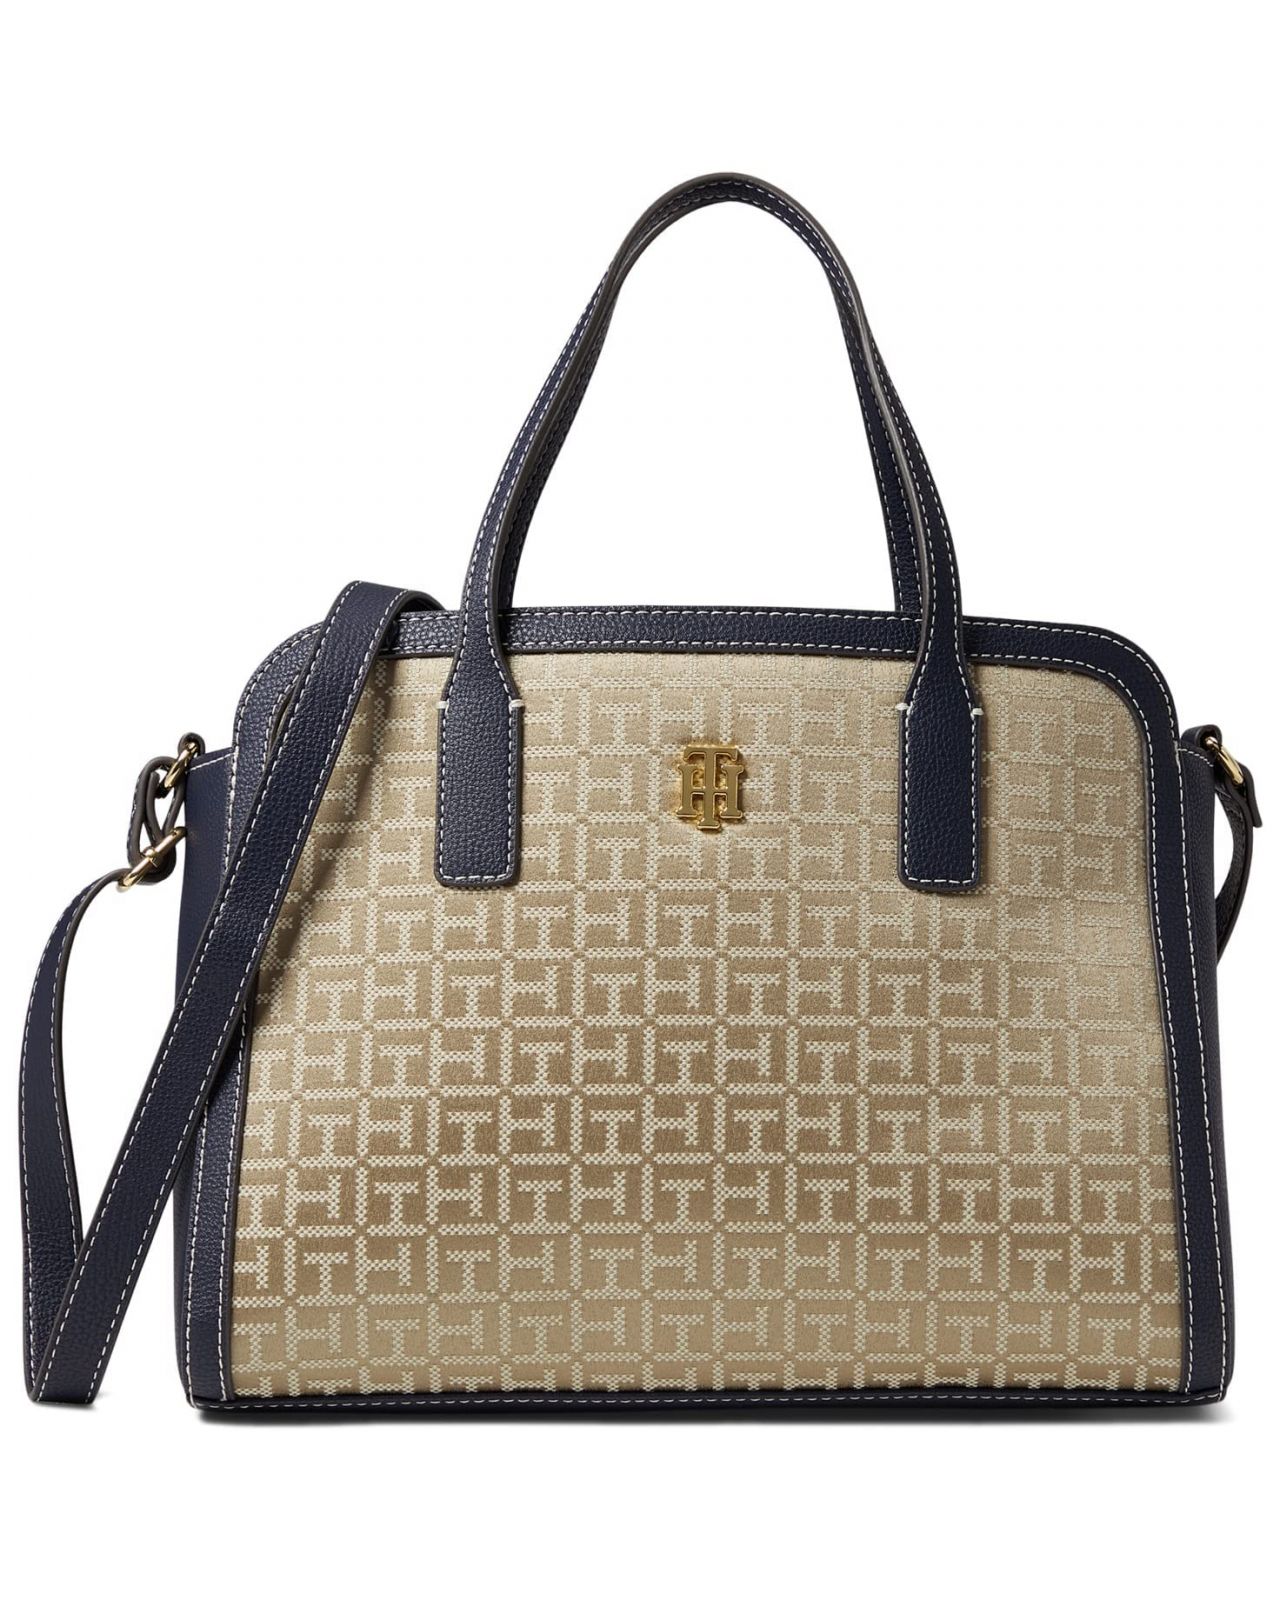 Tommy Hilfiger II Convertible Satchel Square